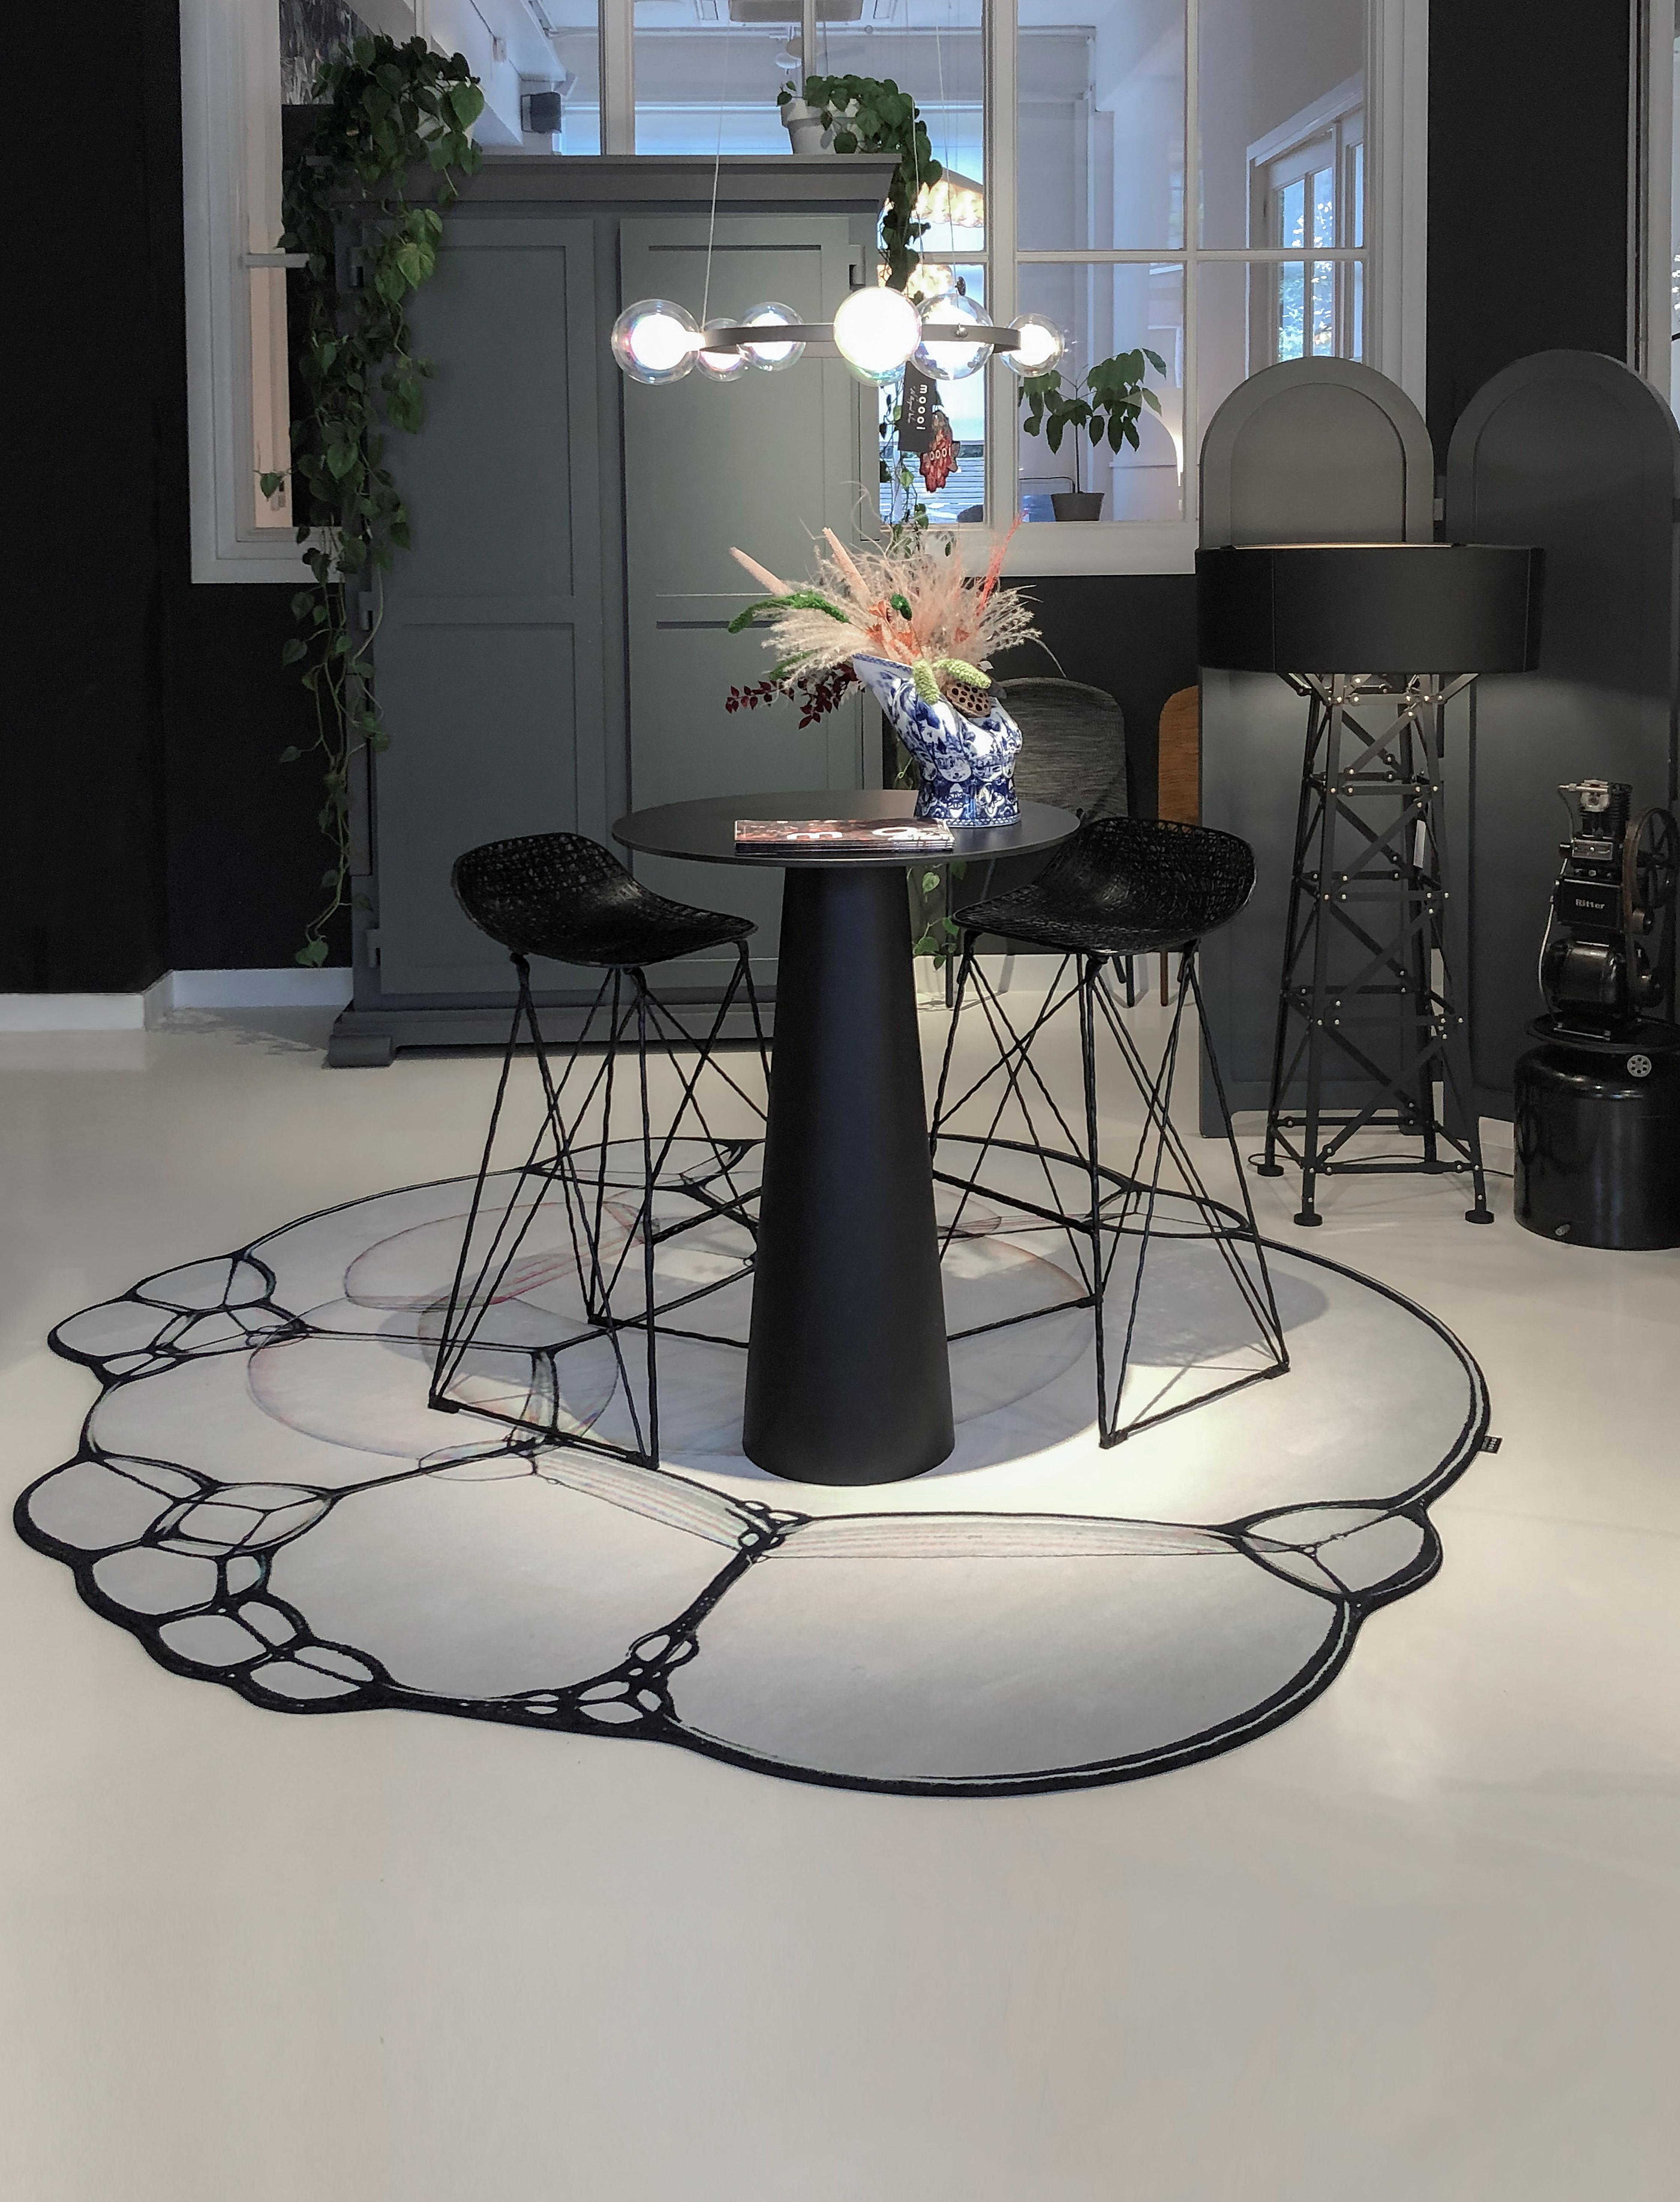 Moooi Large Bubble Oil Zoom rug in Wool with Blind Hem Finish by Sjoerd Vroonland

Sjoerd Vroonland is a master of revised crafts and a remarkable furniture designer. Best known for his “extension chair” that became an instant icon of the Dutch